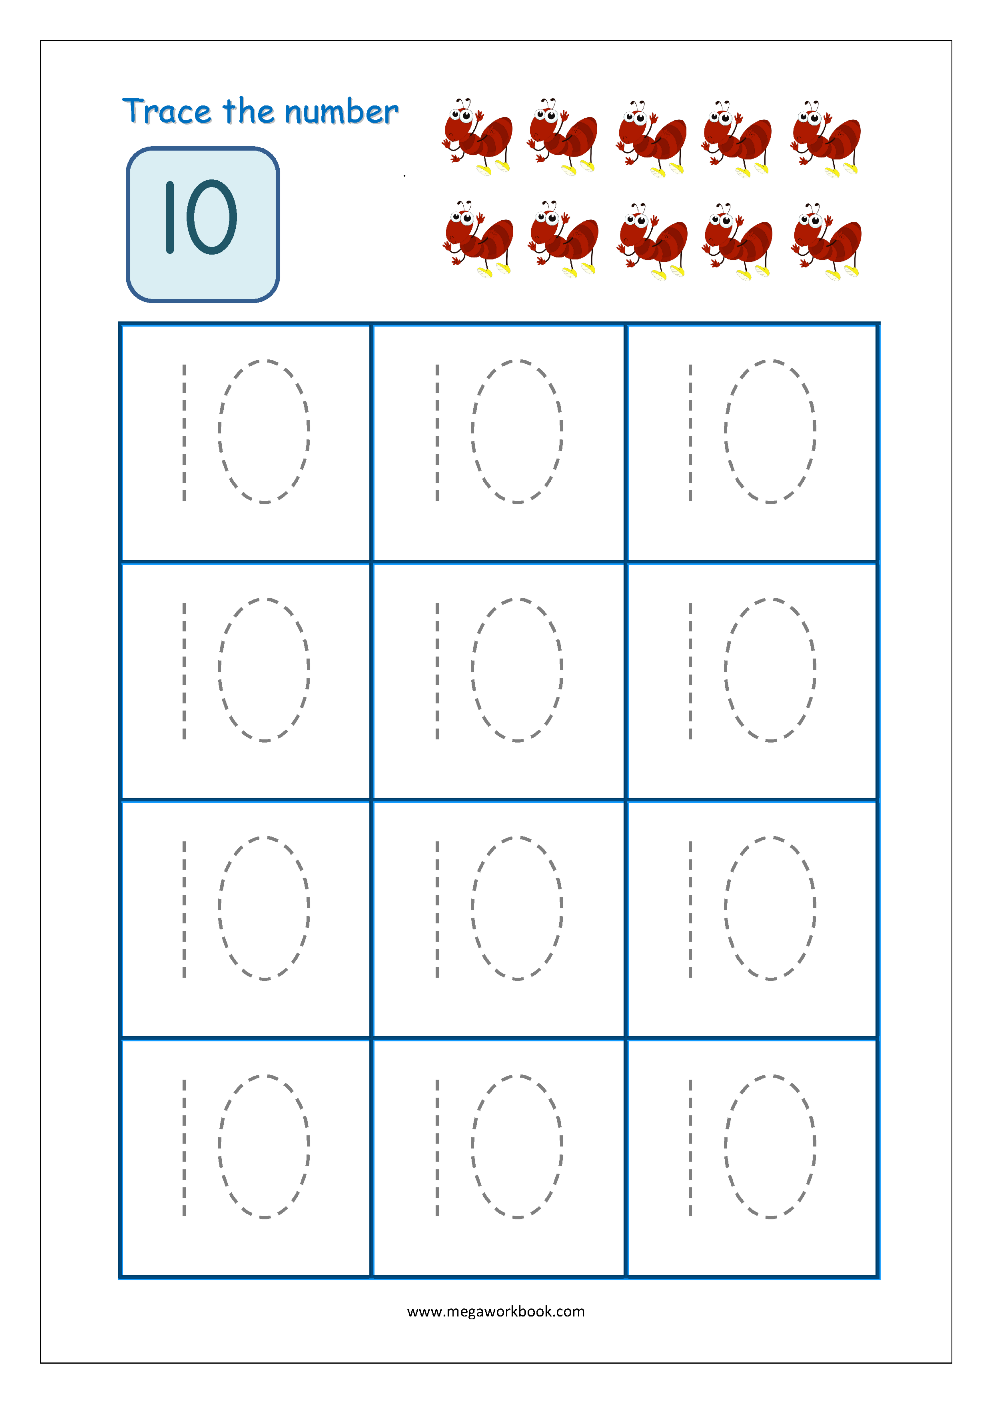 free-printable-worksheets-for-kids-dotted-numbers-to-trace-1-10-worksheets-number-tracing